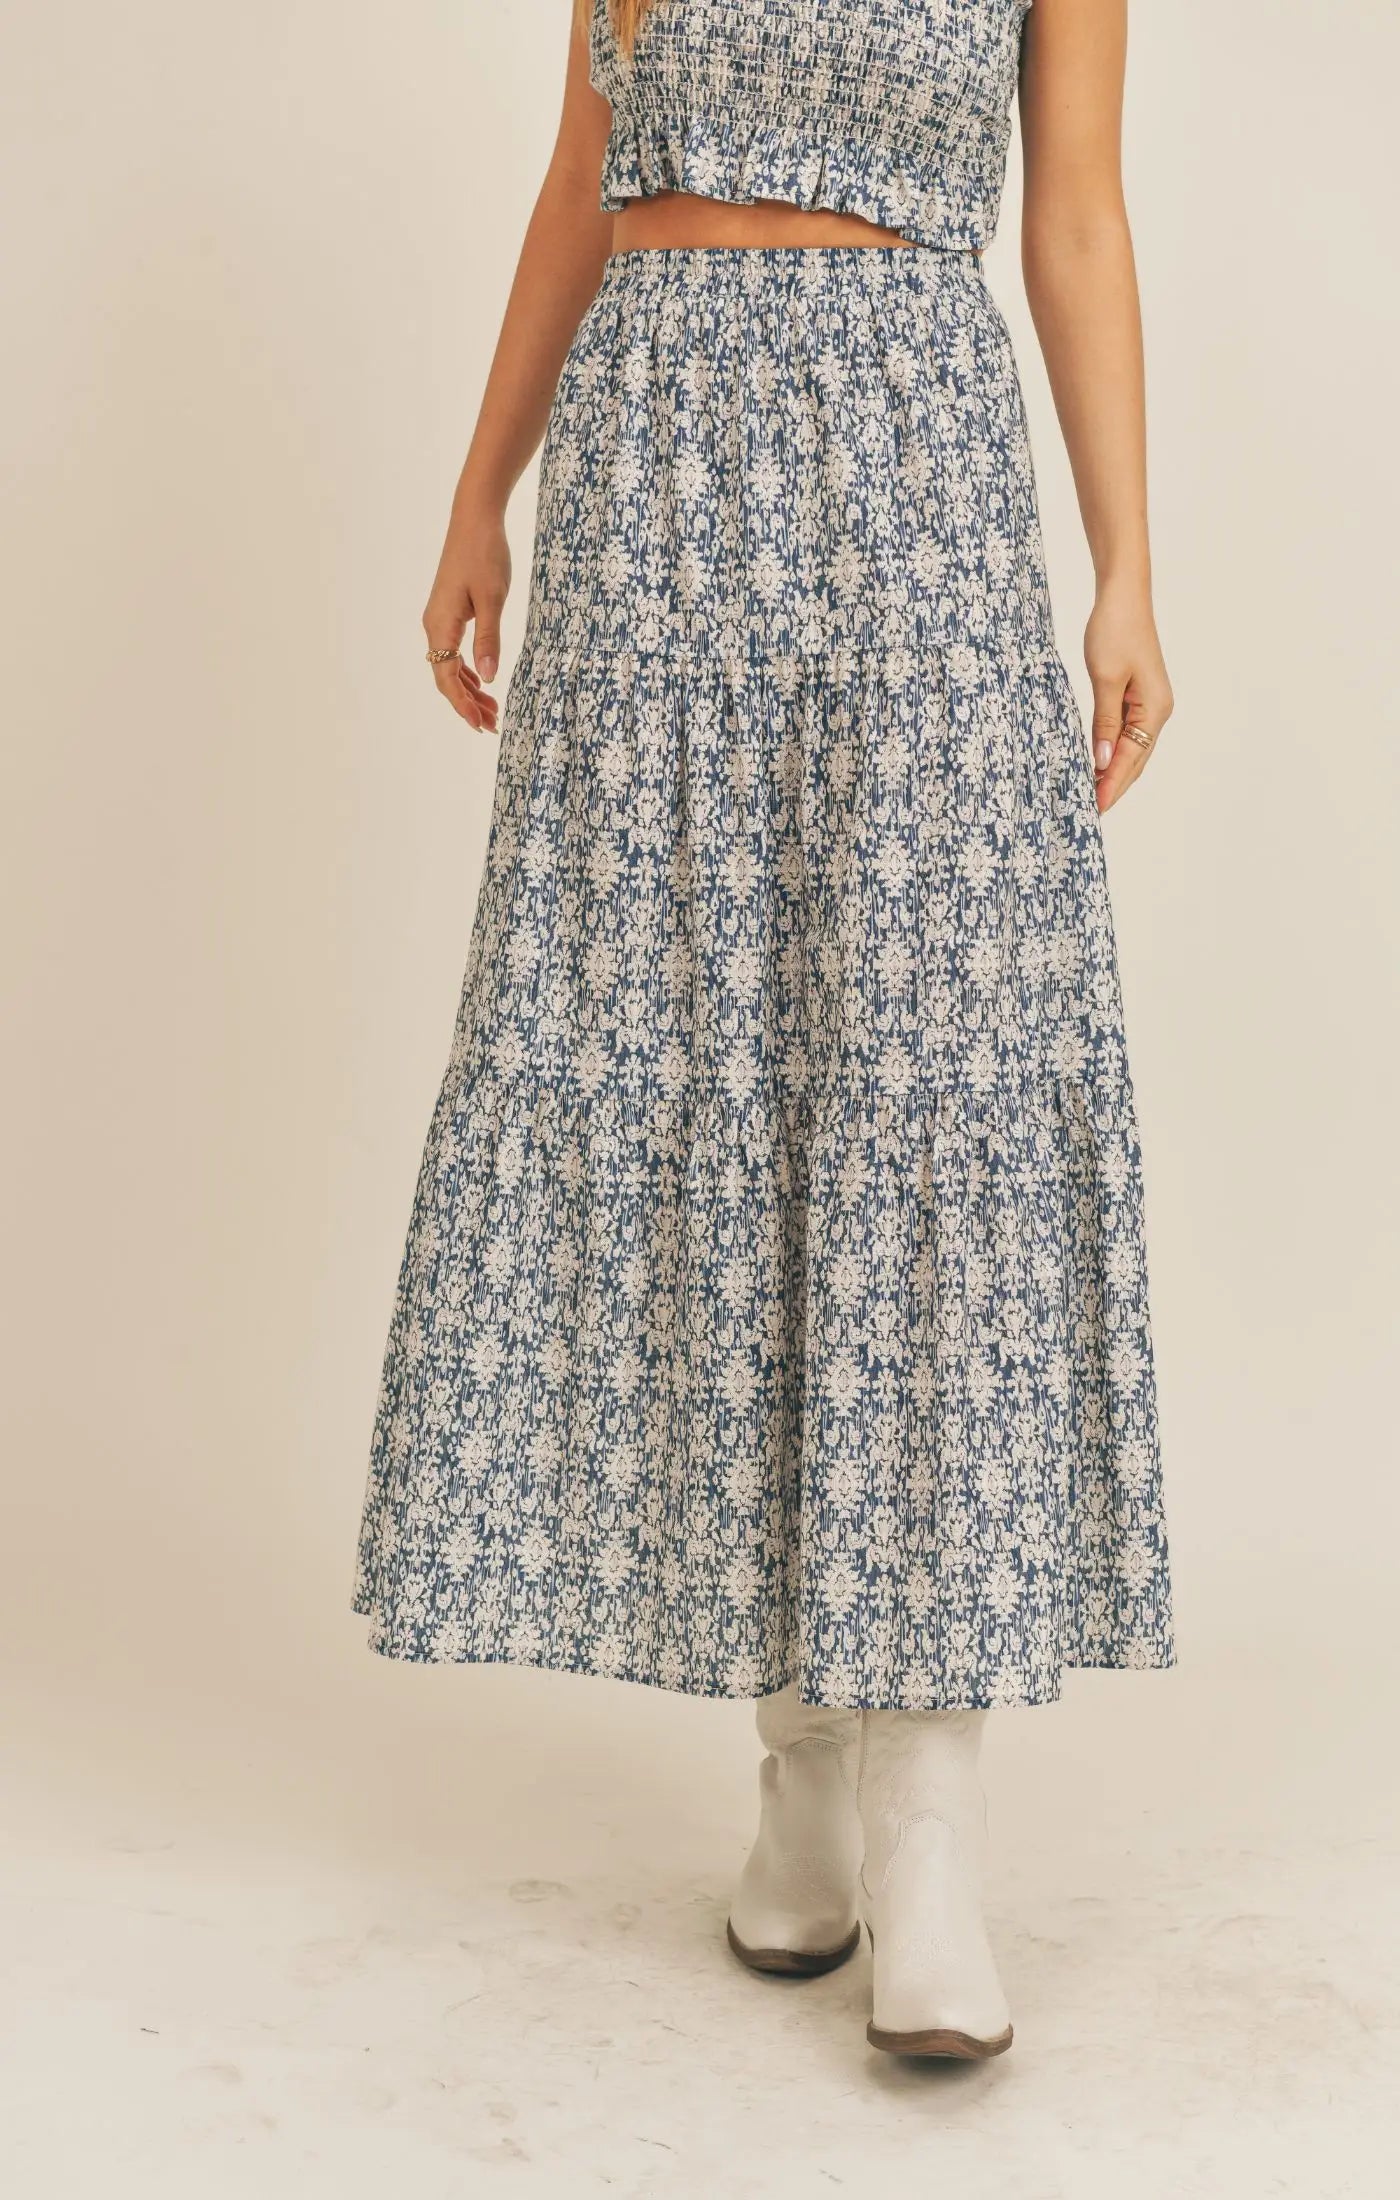 The Walk With Me Tiered Midi Skirt